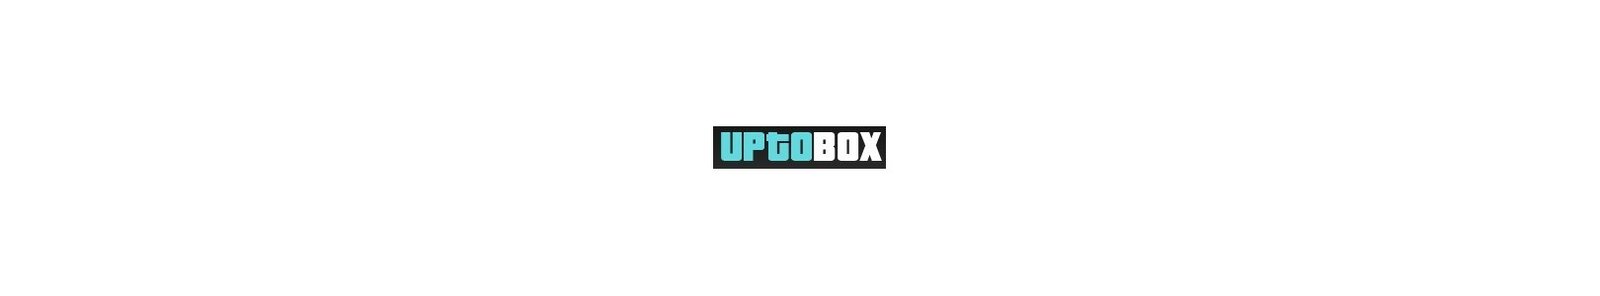 Uptobox Official Reseller In India and Worldwide